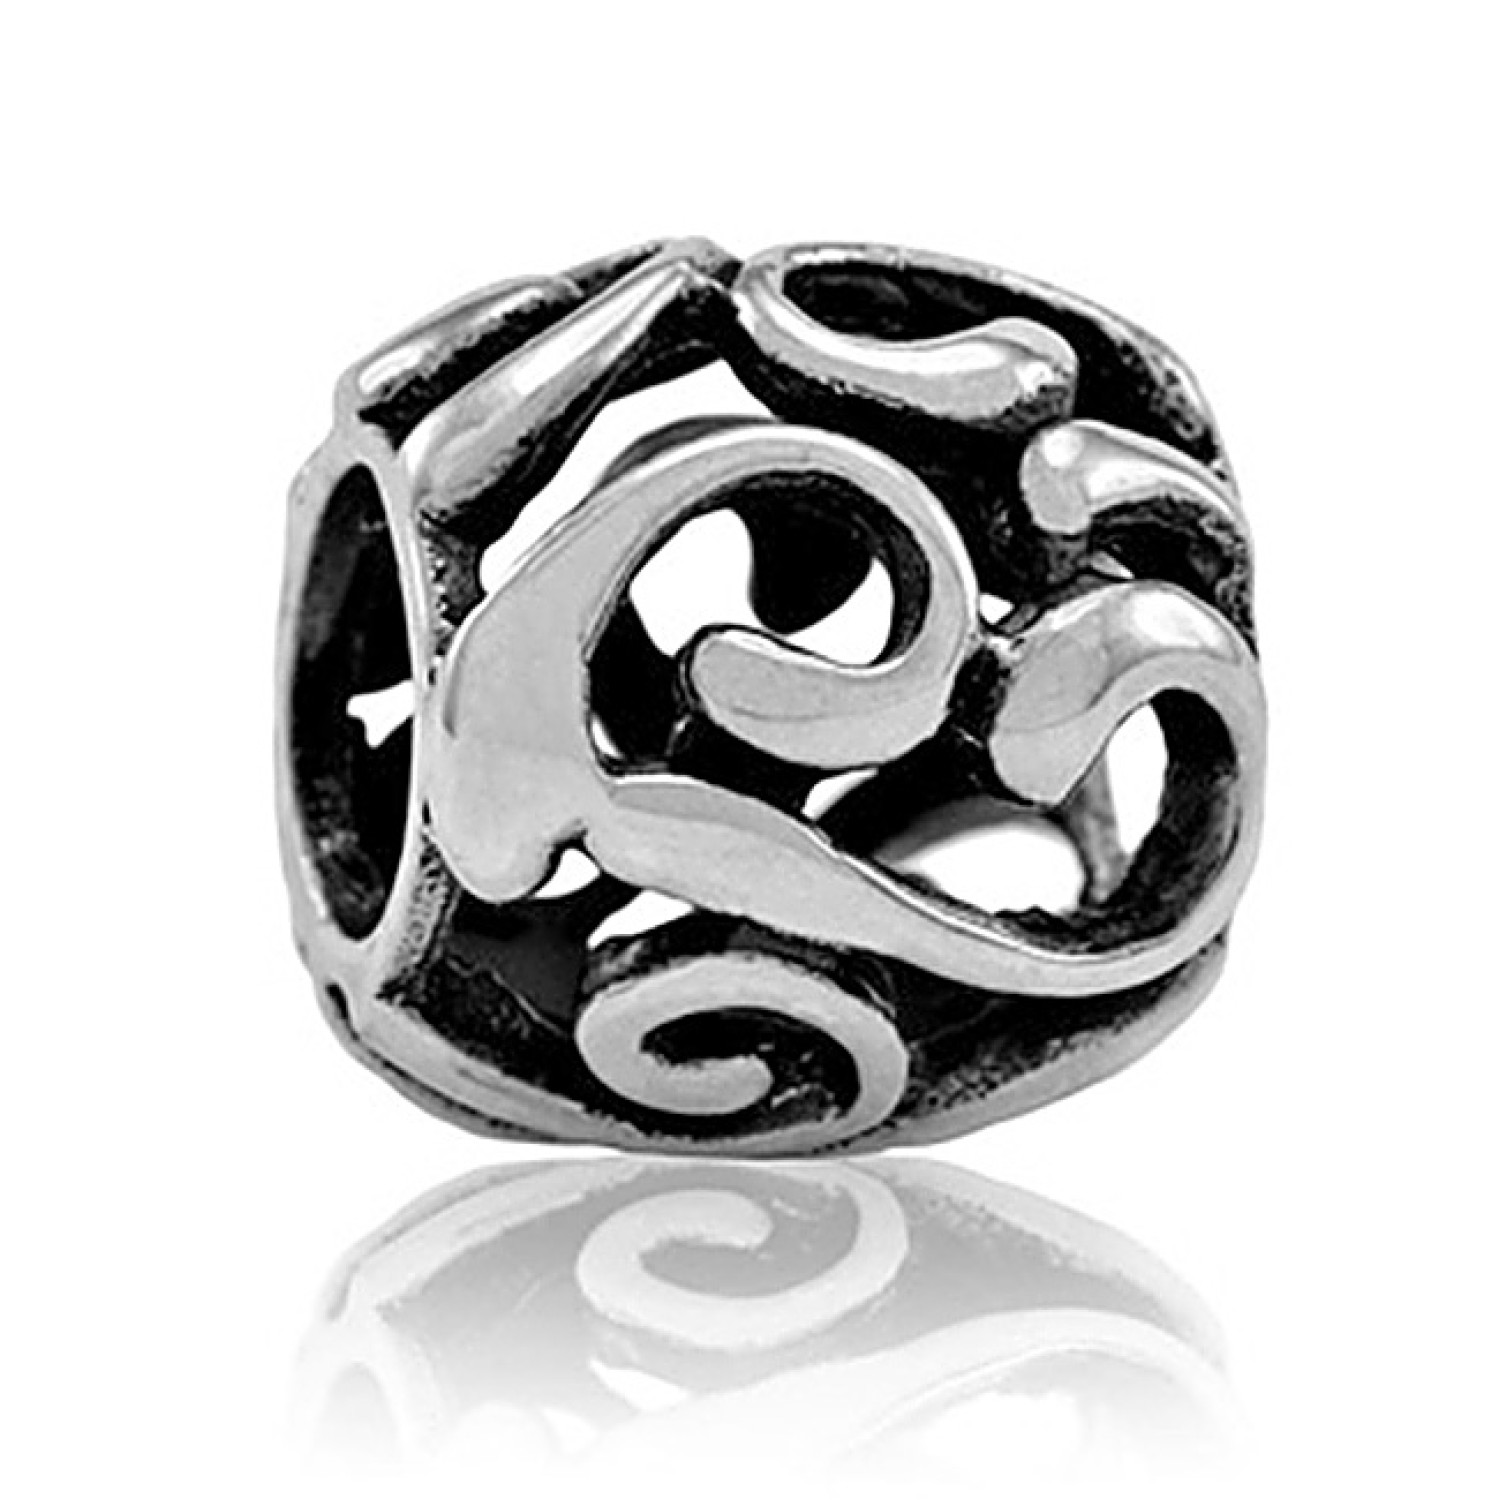 LK173 Evolve  Dreams. LK173 Evolve Silver Charm Dreams The koru is a traditional Maori symbol representing personal growth, new life, creation and fresh beginnings. The intricate pattern of the koru spirals in this charm symbolises our hopes @christies.on